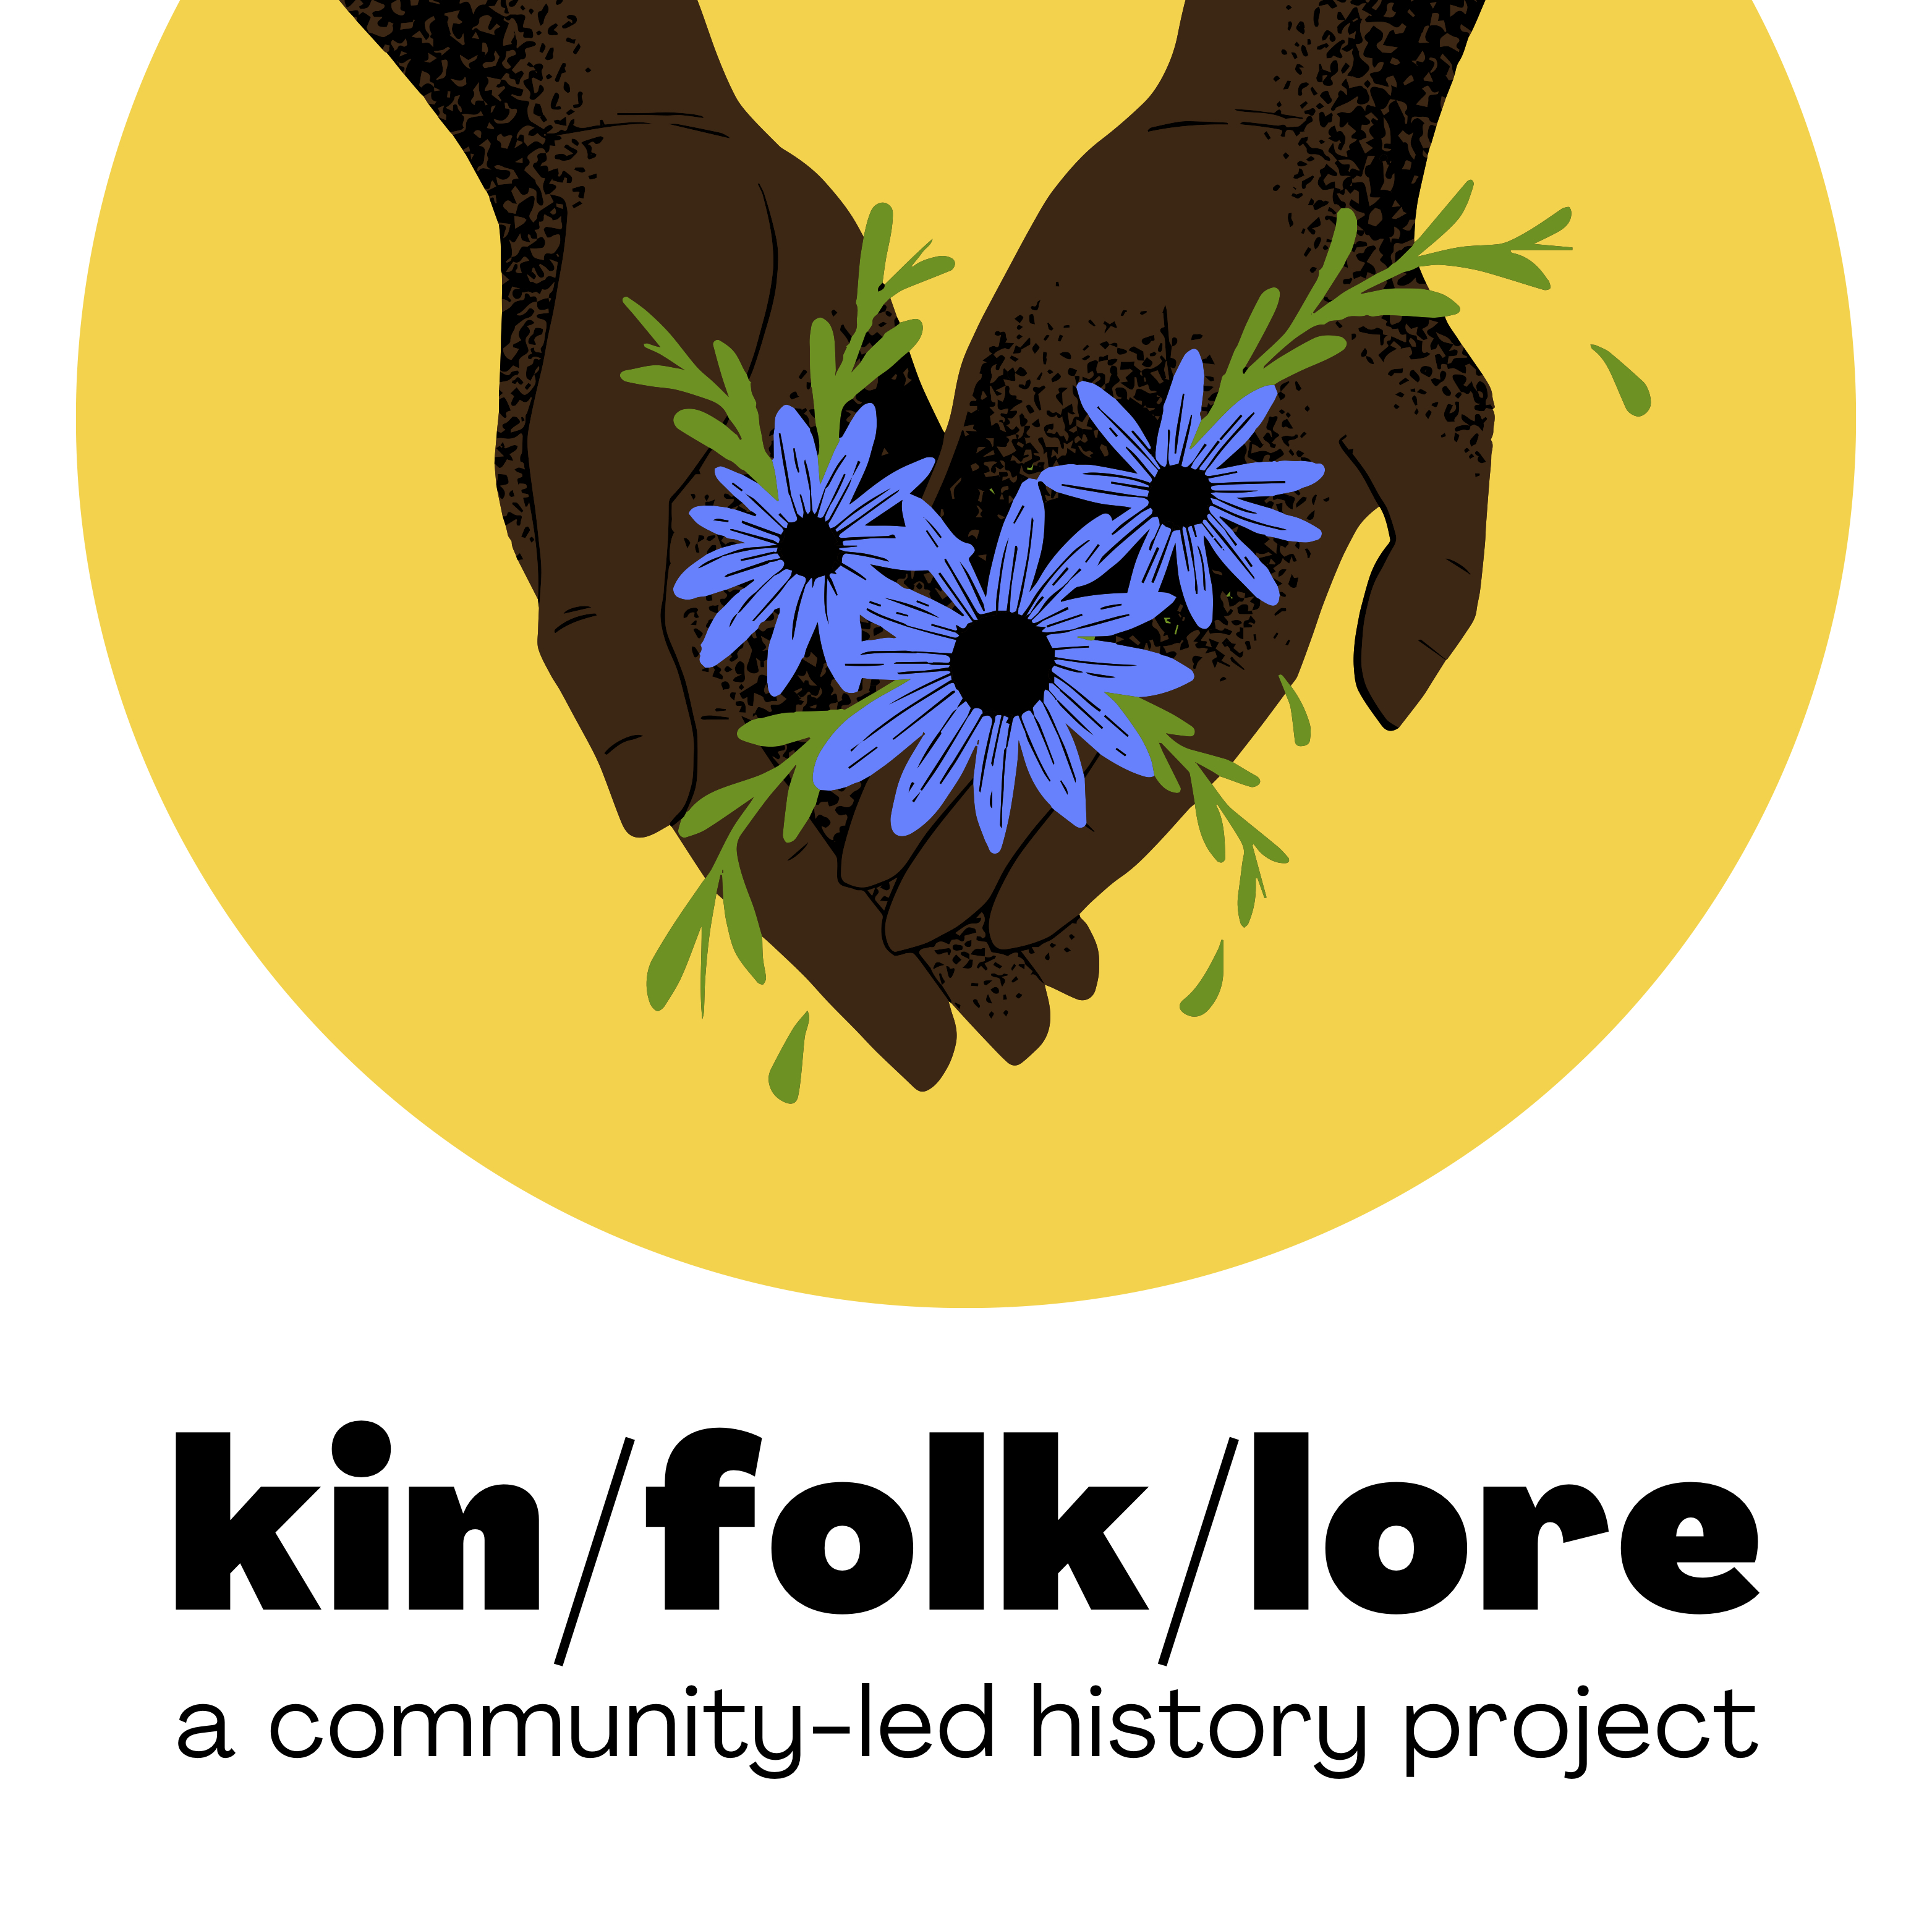 Logo - dark brown hands holding blue wildflowers against yellow circle, above black text "kin/folk/lore: a community-led history project."